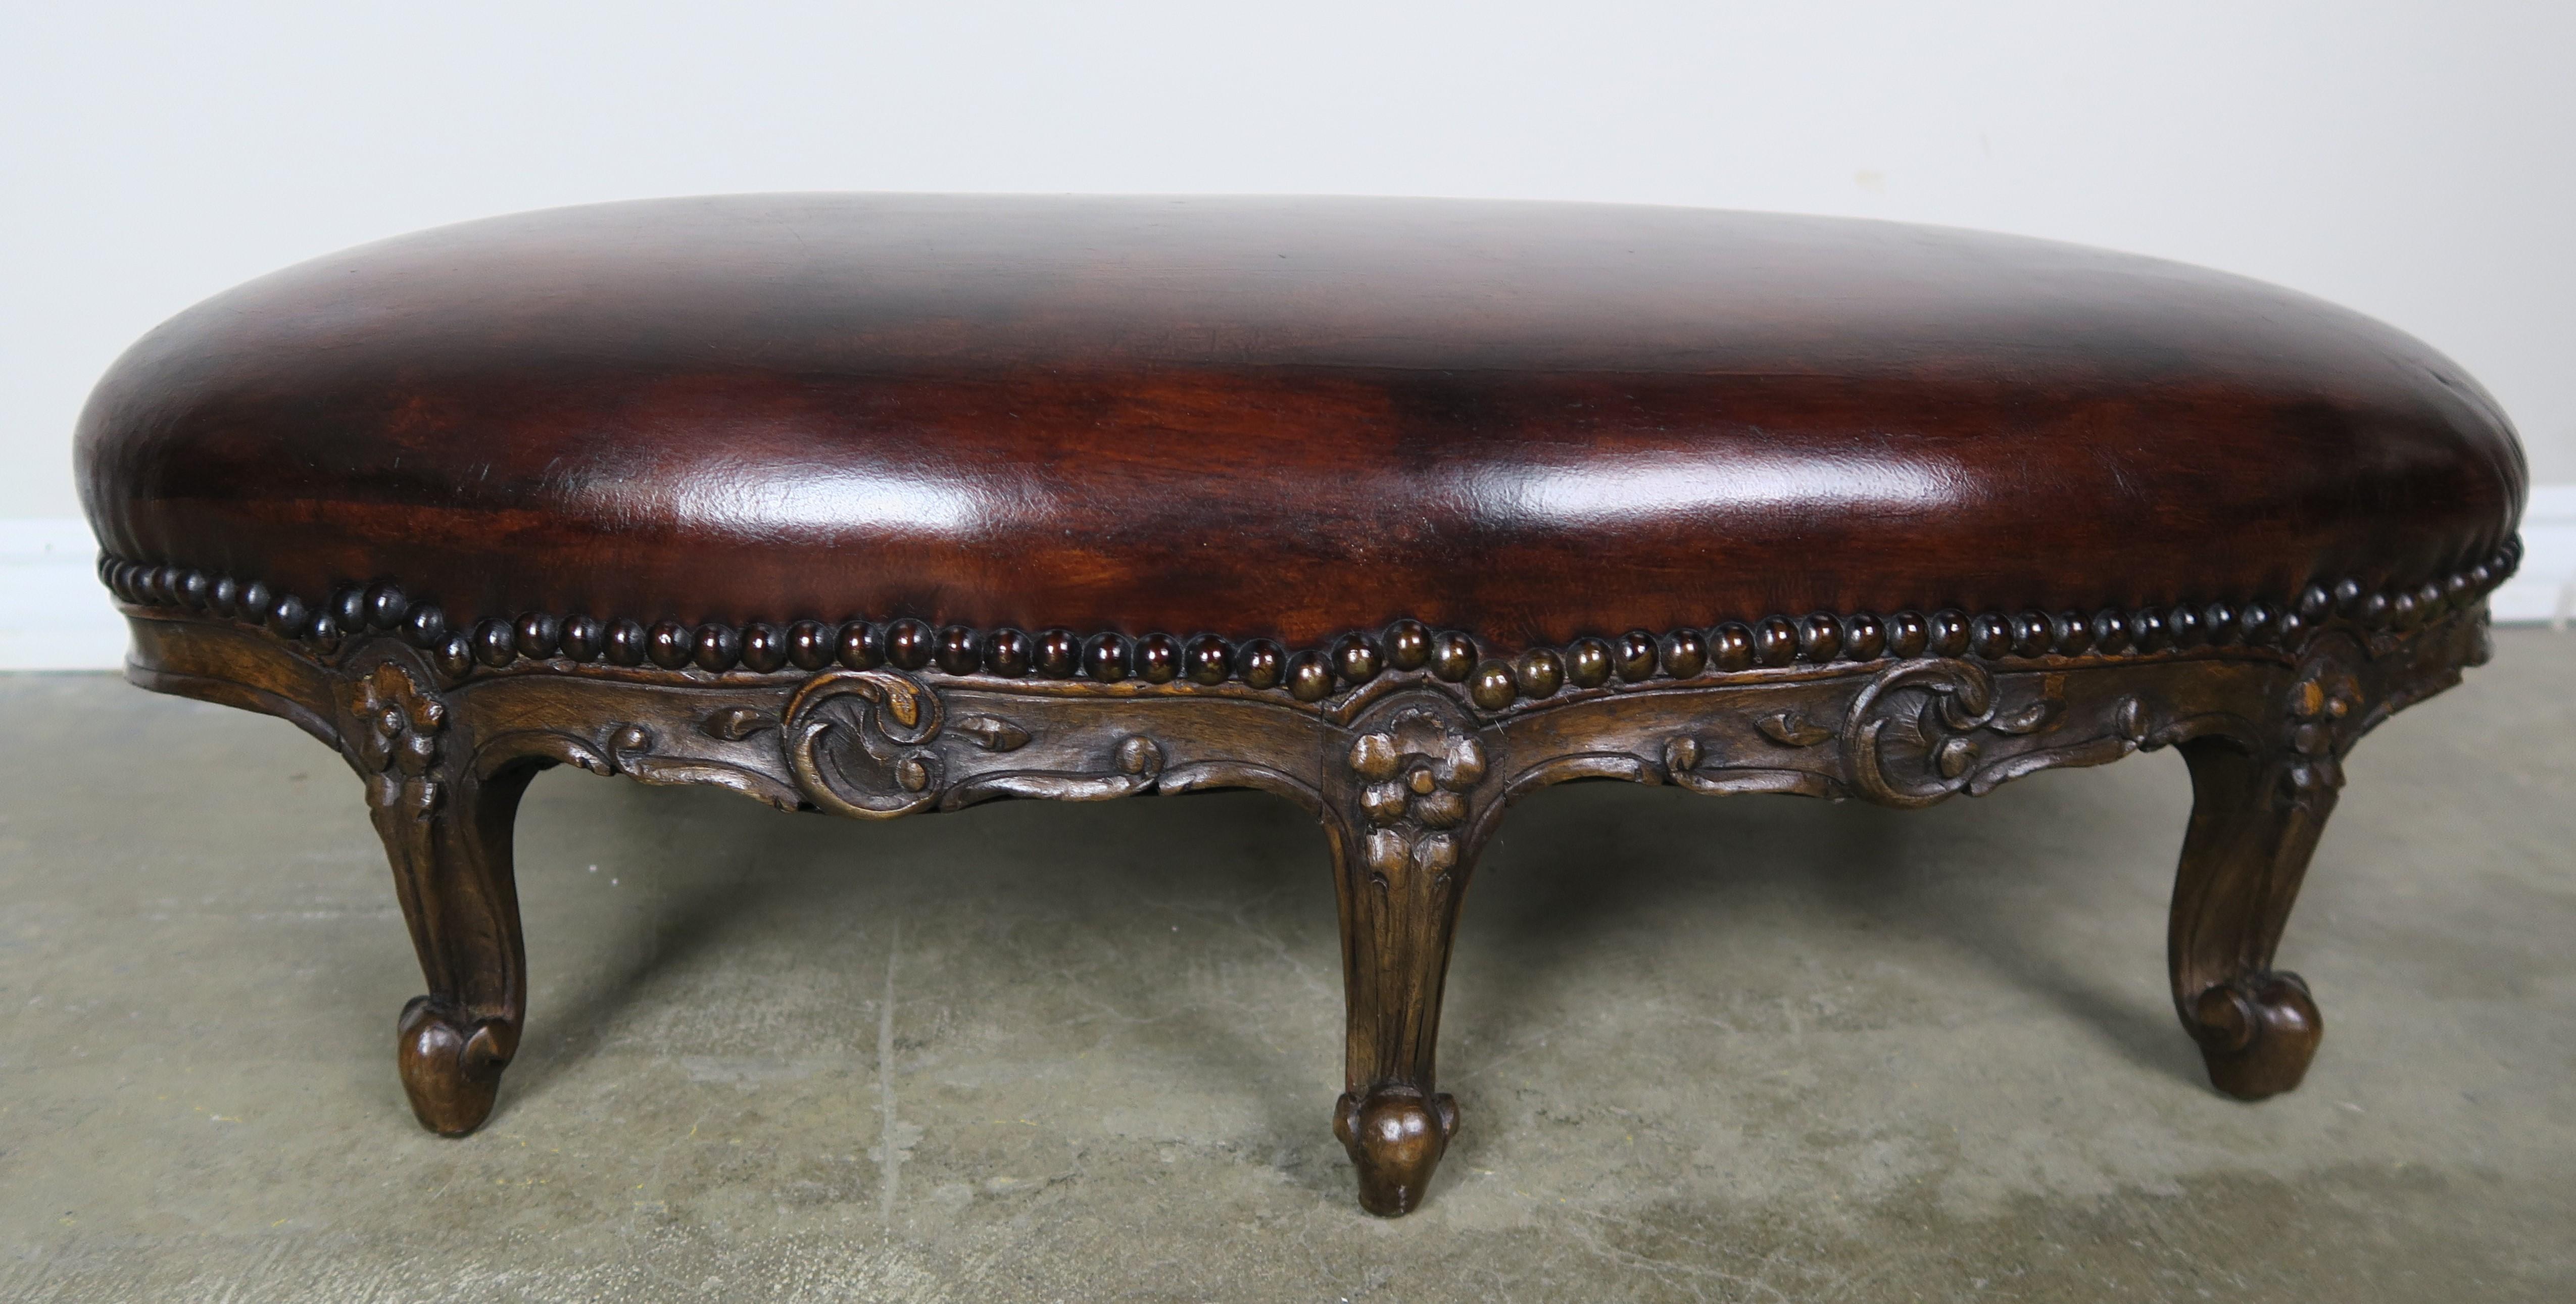 19th century French carved walnut six legged footstool in a Louis XV style frame standing on six cabriole legs that end in rams head feet. Beautiful patina on both frame and leather. The leather is detailed with antique brass colored nailheads.